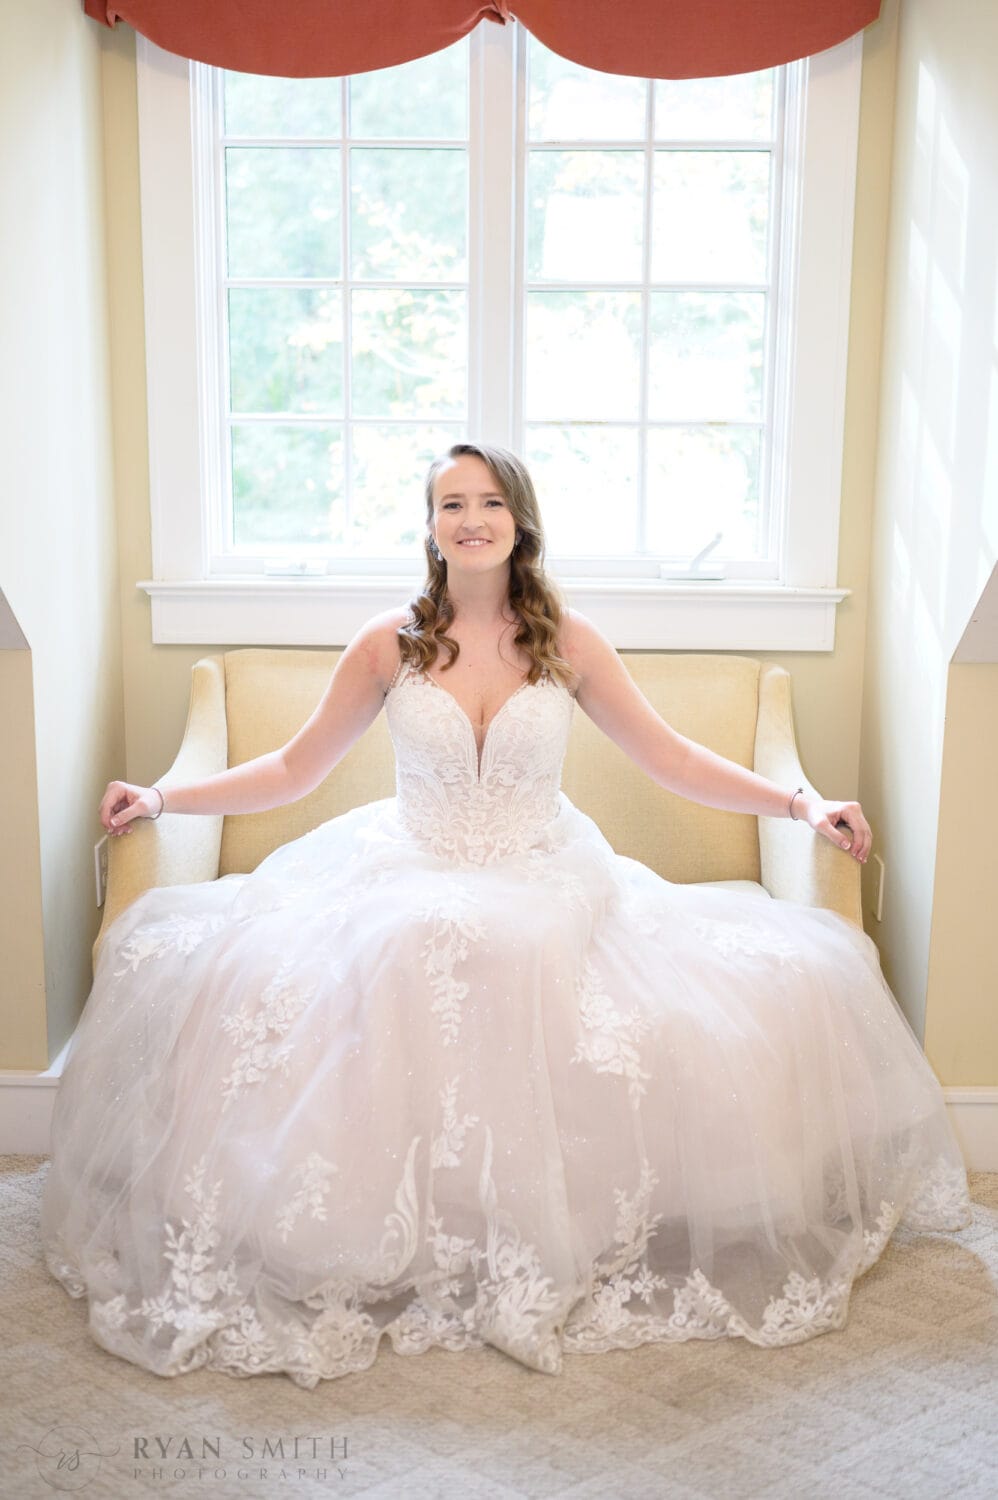 Bride sitting on the couch in the window light - Brookgreen Gardens